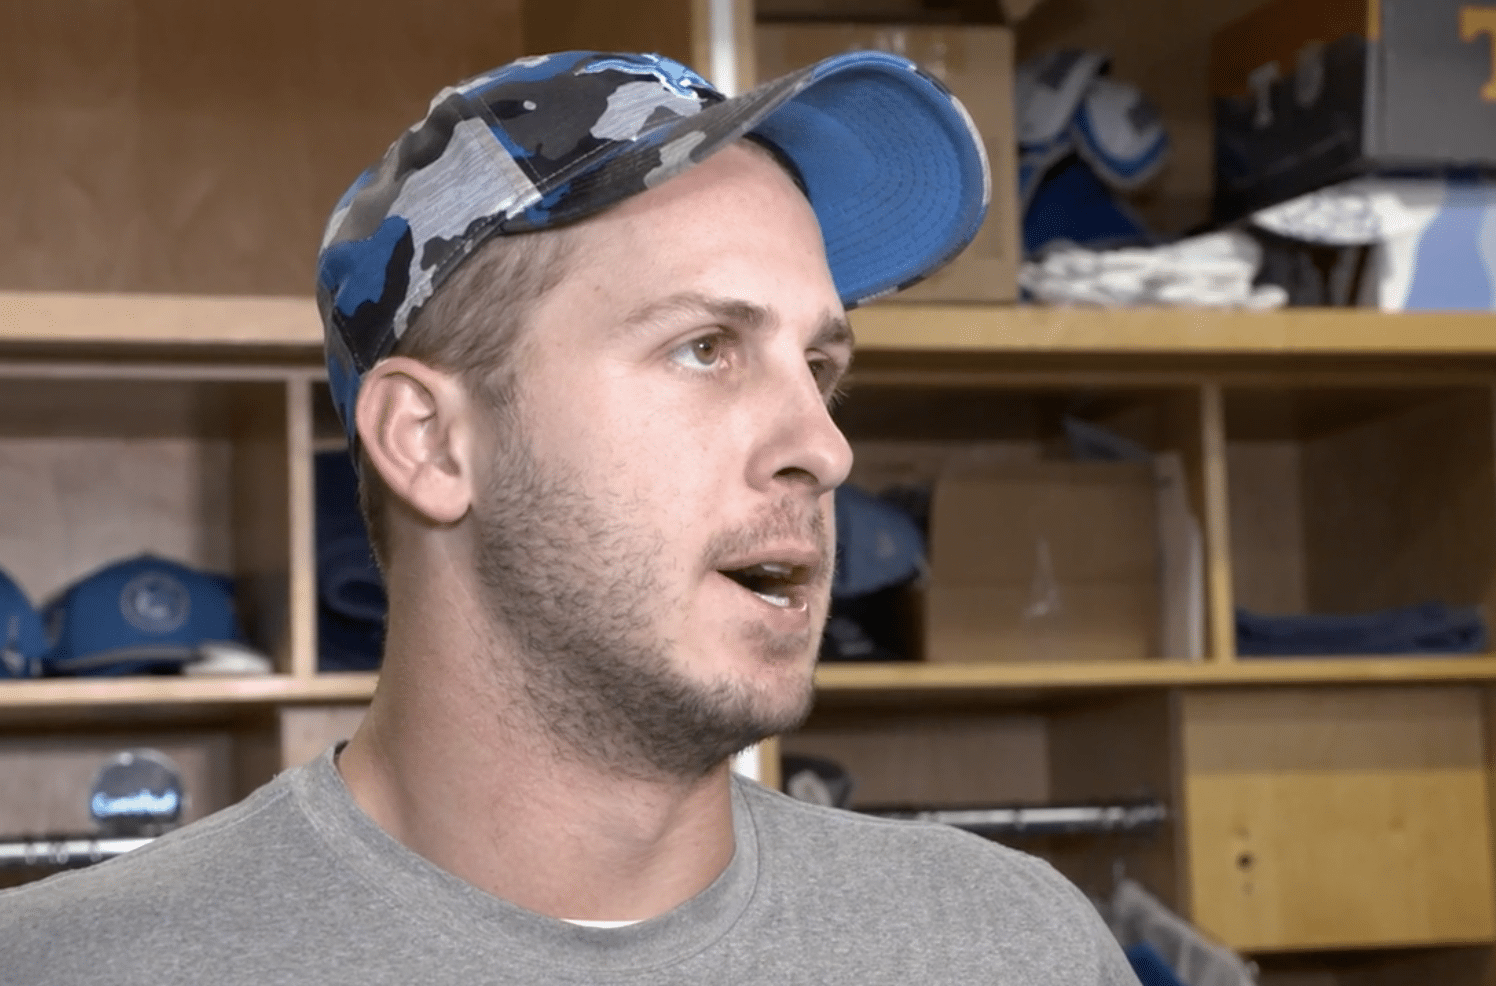 Jared Goff Aims to Elevate Detroit Lions Jared Goff Reacts to Detroit Lions Fans Detroit Lions QB Jared Goff Jared Goff gives highest praise yet for Dan Campbell Jared Goff Confirms Official Error